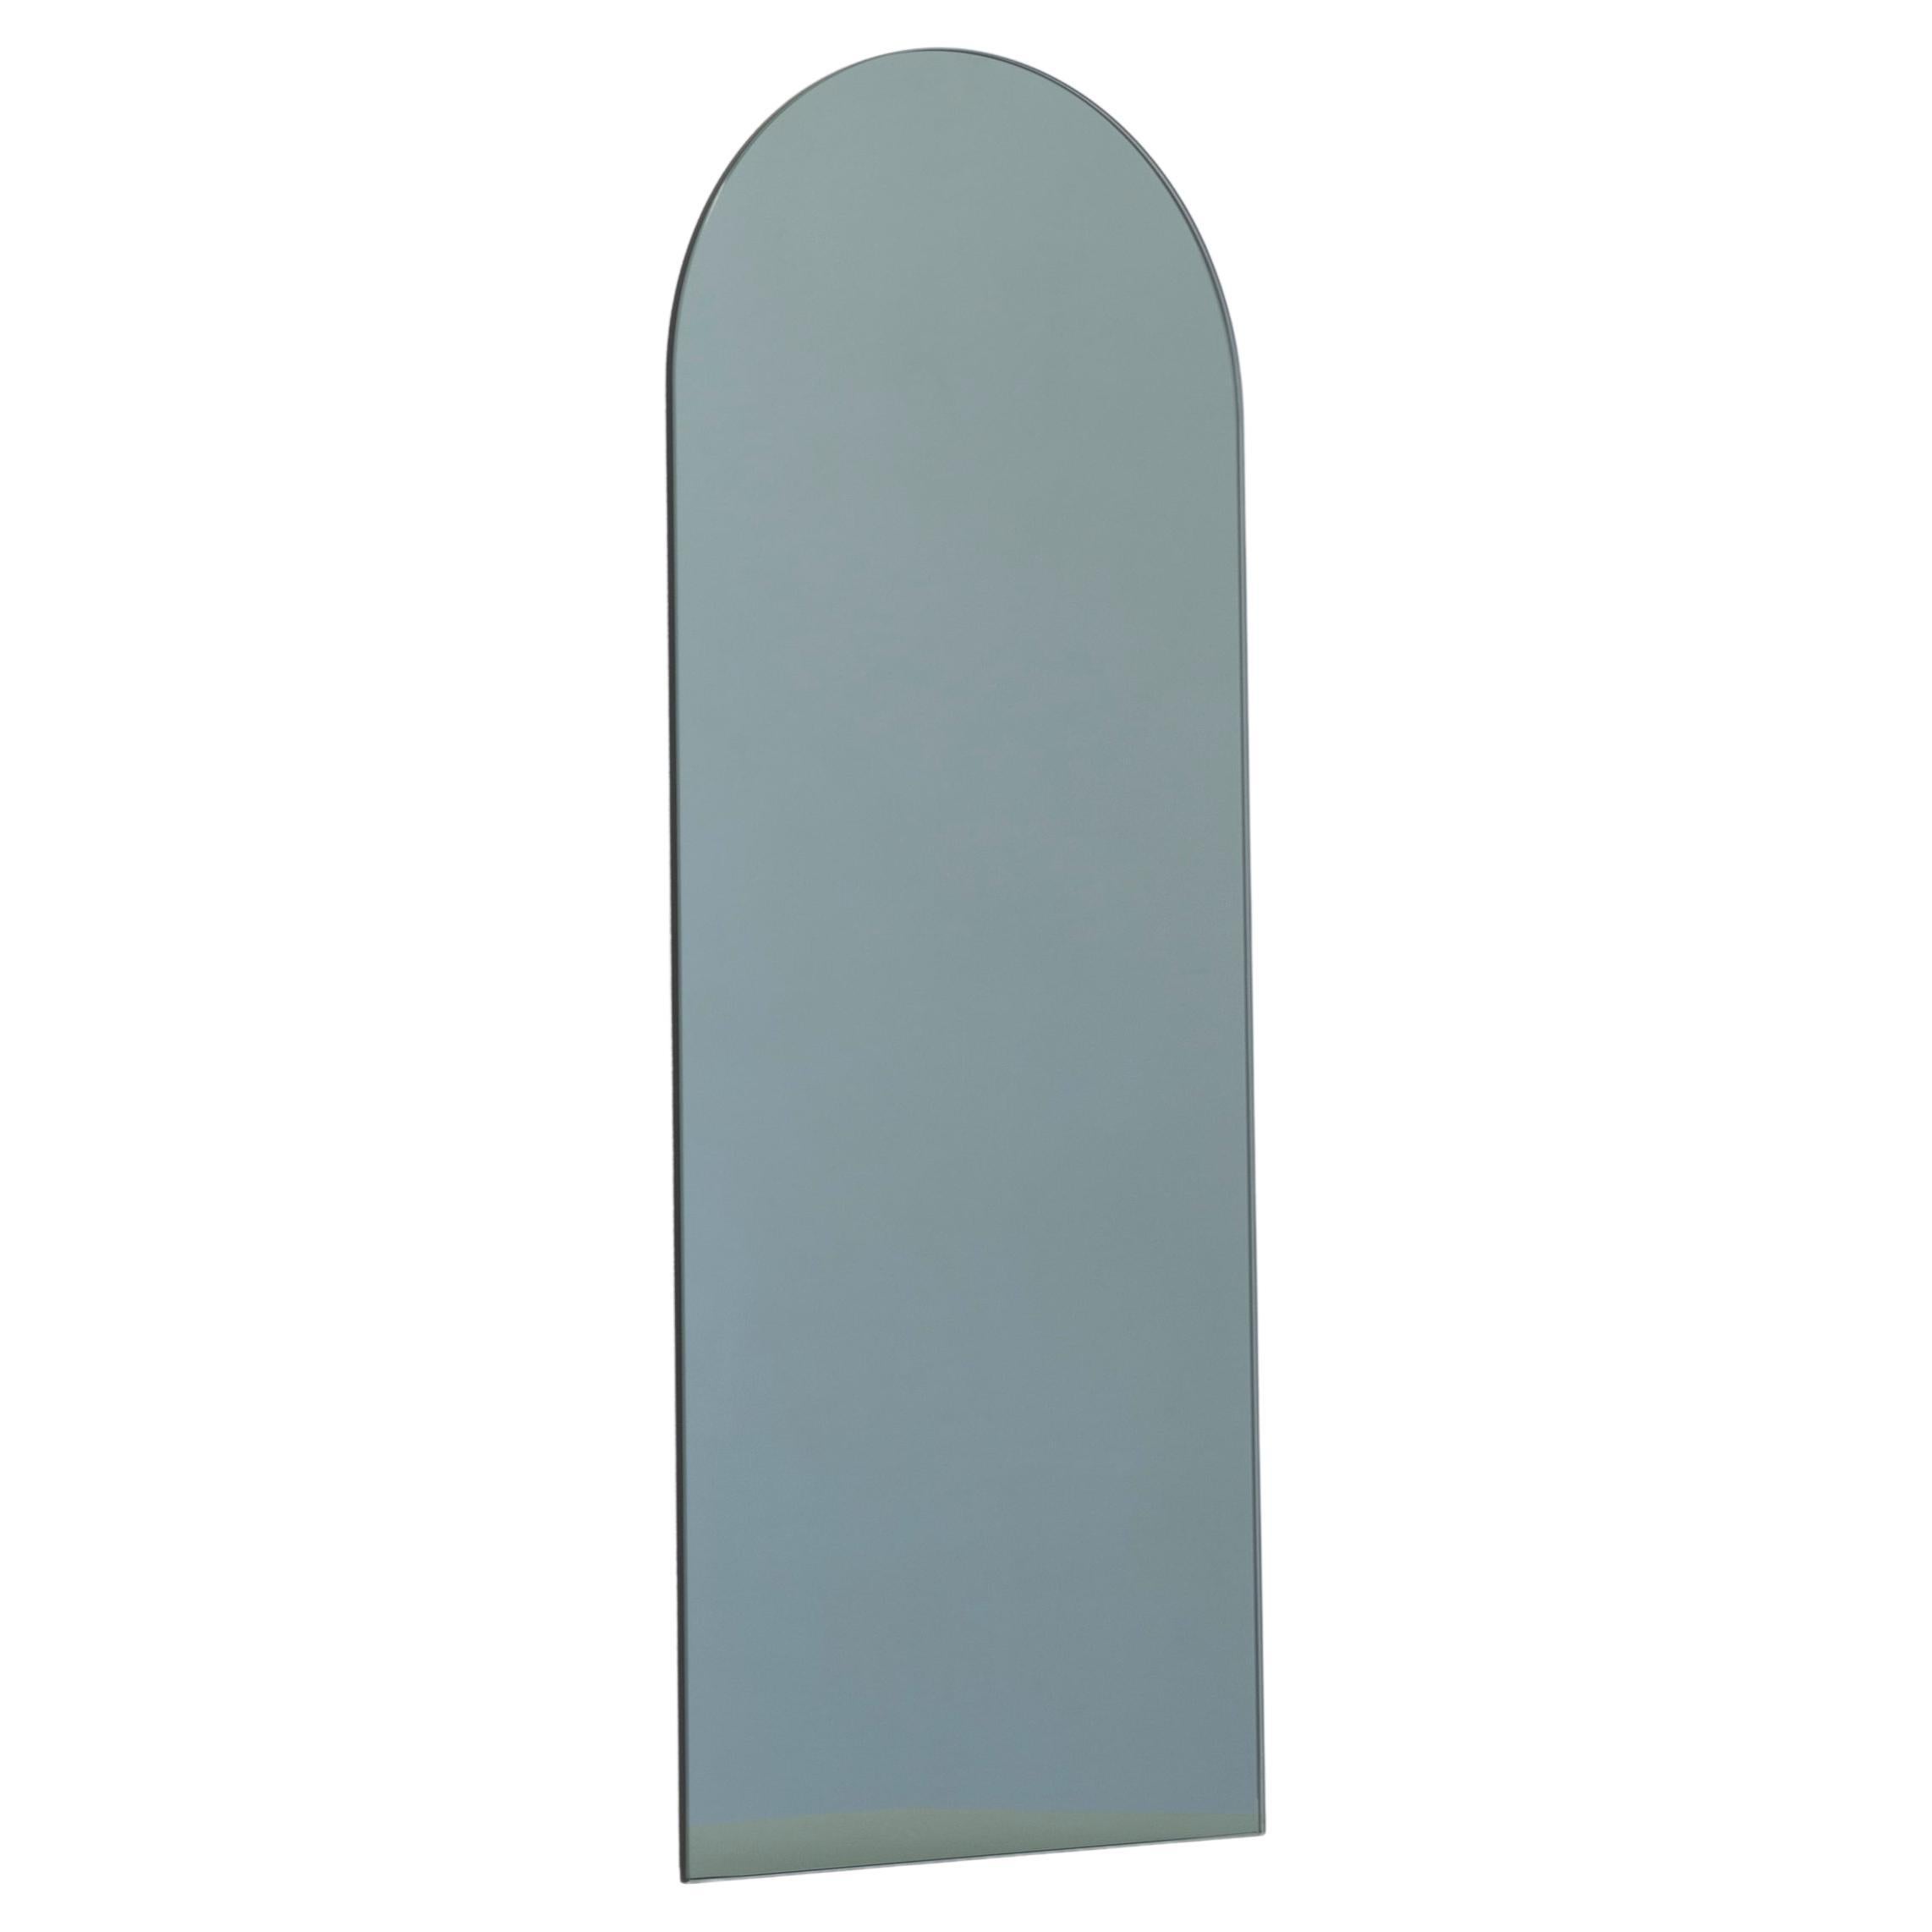 Arcus Black Tinted Arched Modern Frameless Mirror, Large For Sale